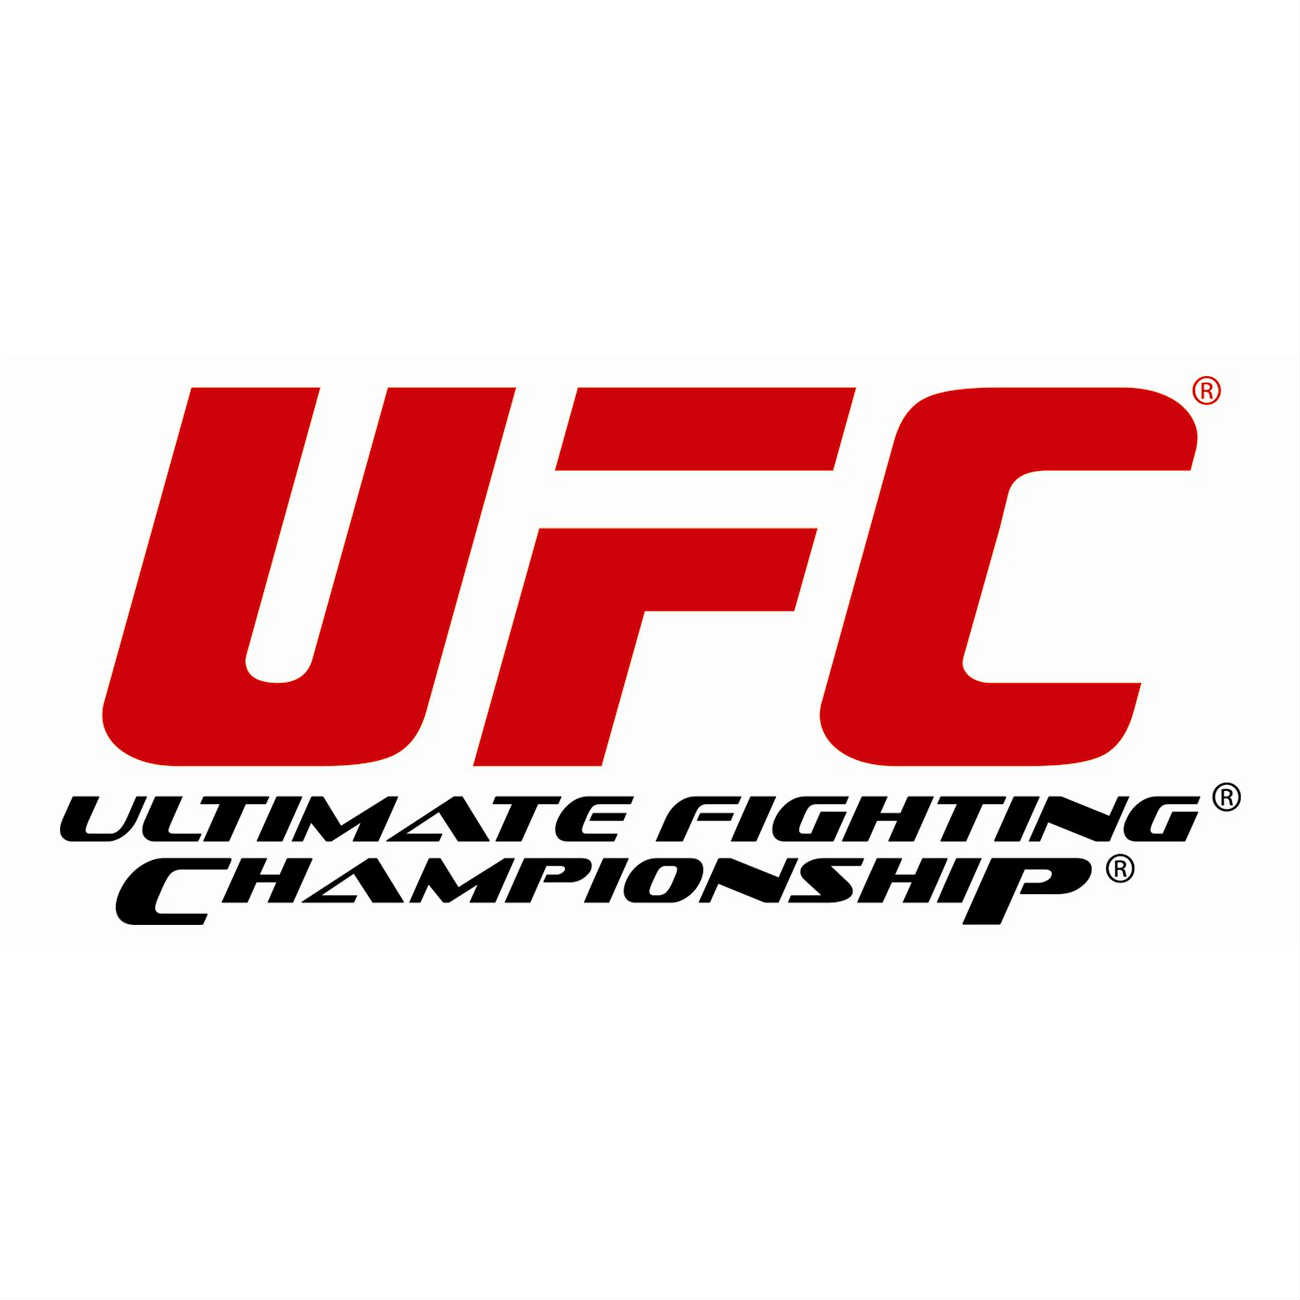 Where to watch UFC fights in Hong Kong